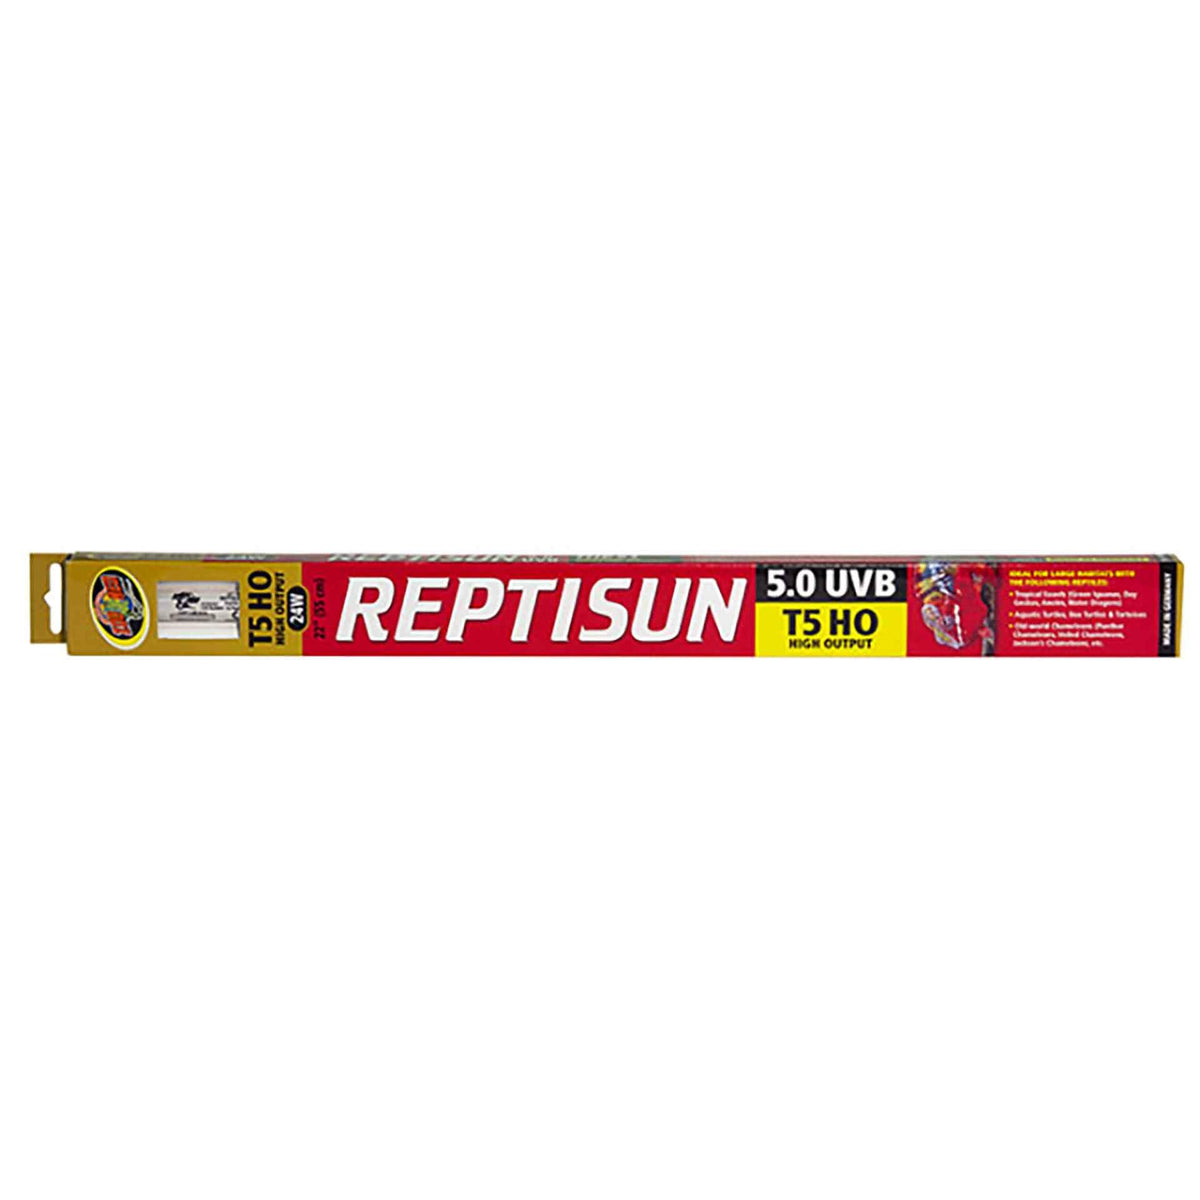 Zoo Med ReptiSun T5 HO 5.0 UVB Tube 116cm 54w - In Store Only Pick Up